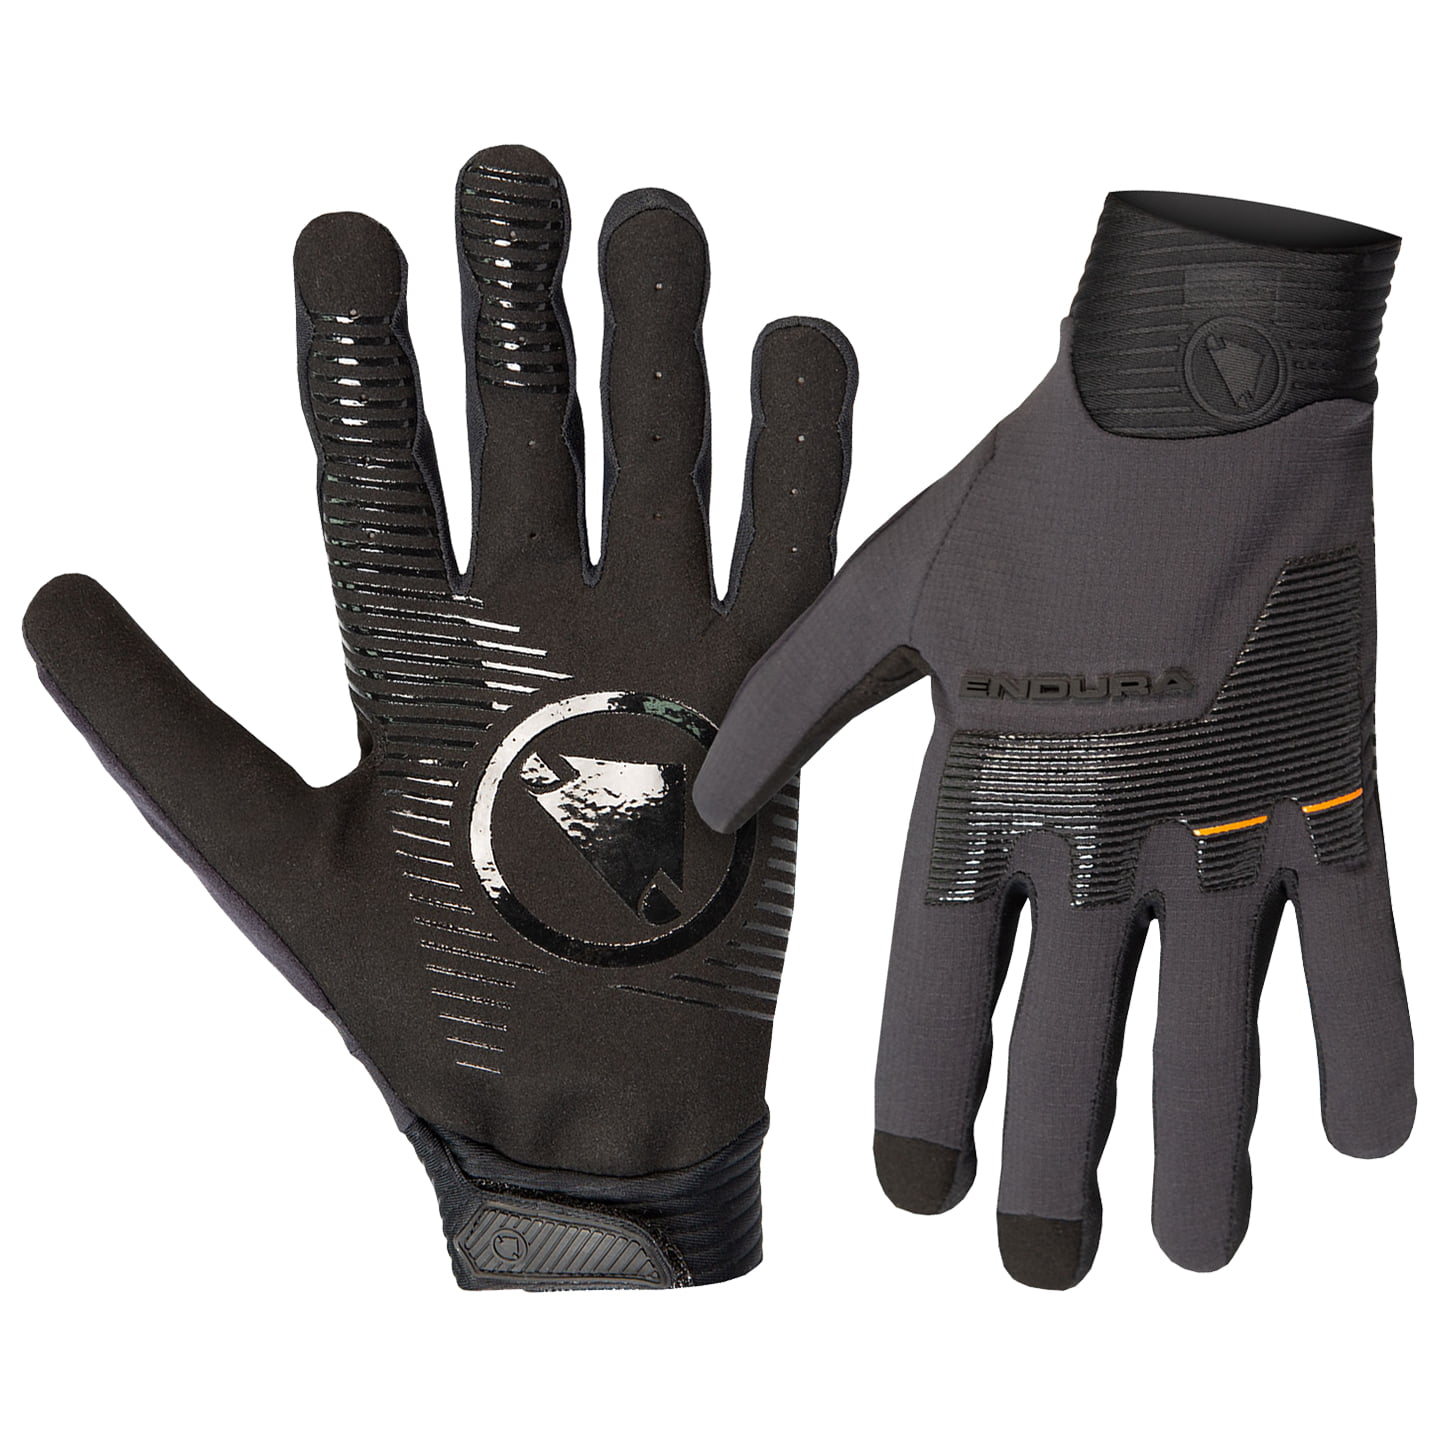 ENDURA MT500 D30 Gloves Cycling Gloves, for men, size 2XL, Cycling gloves, Cycle clothing